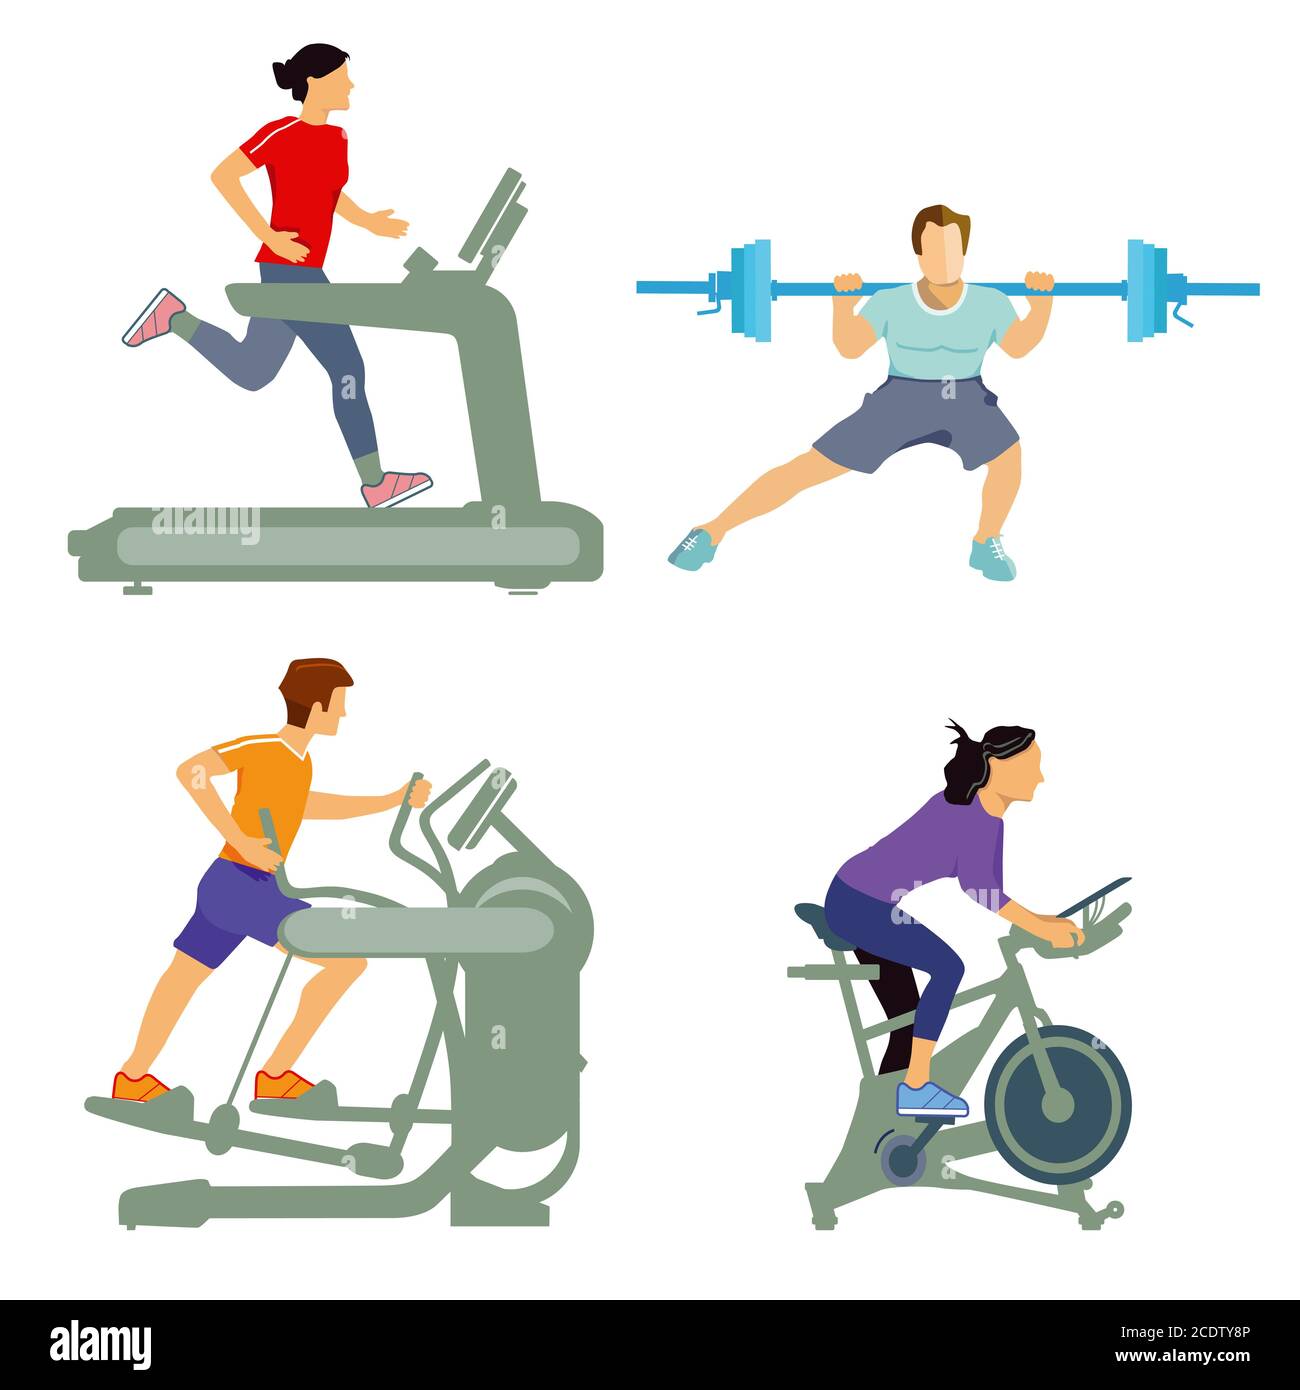 Gym with fitness equipment Stock Photo